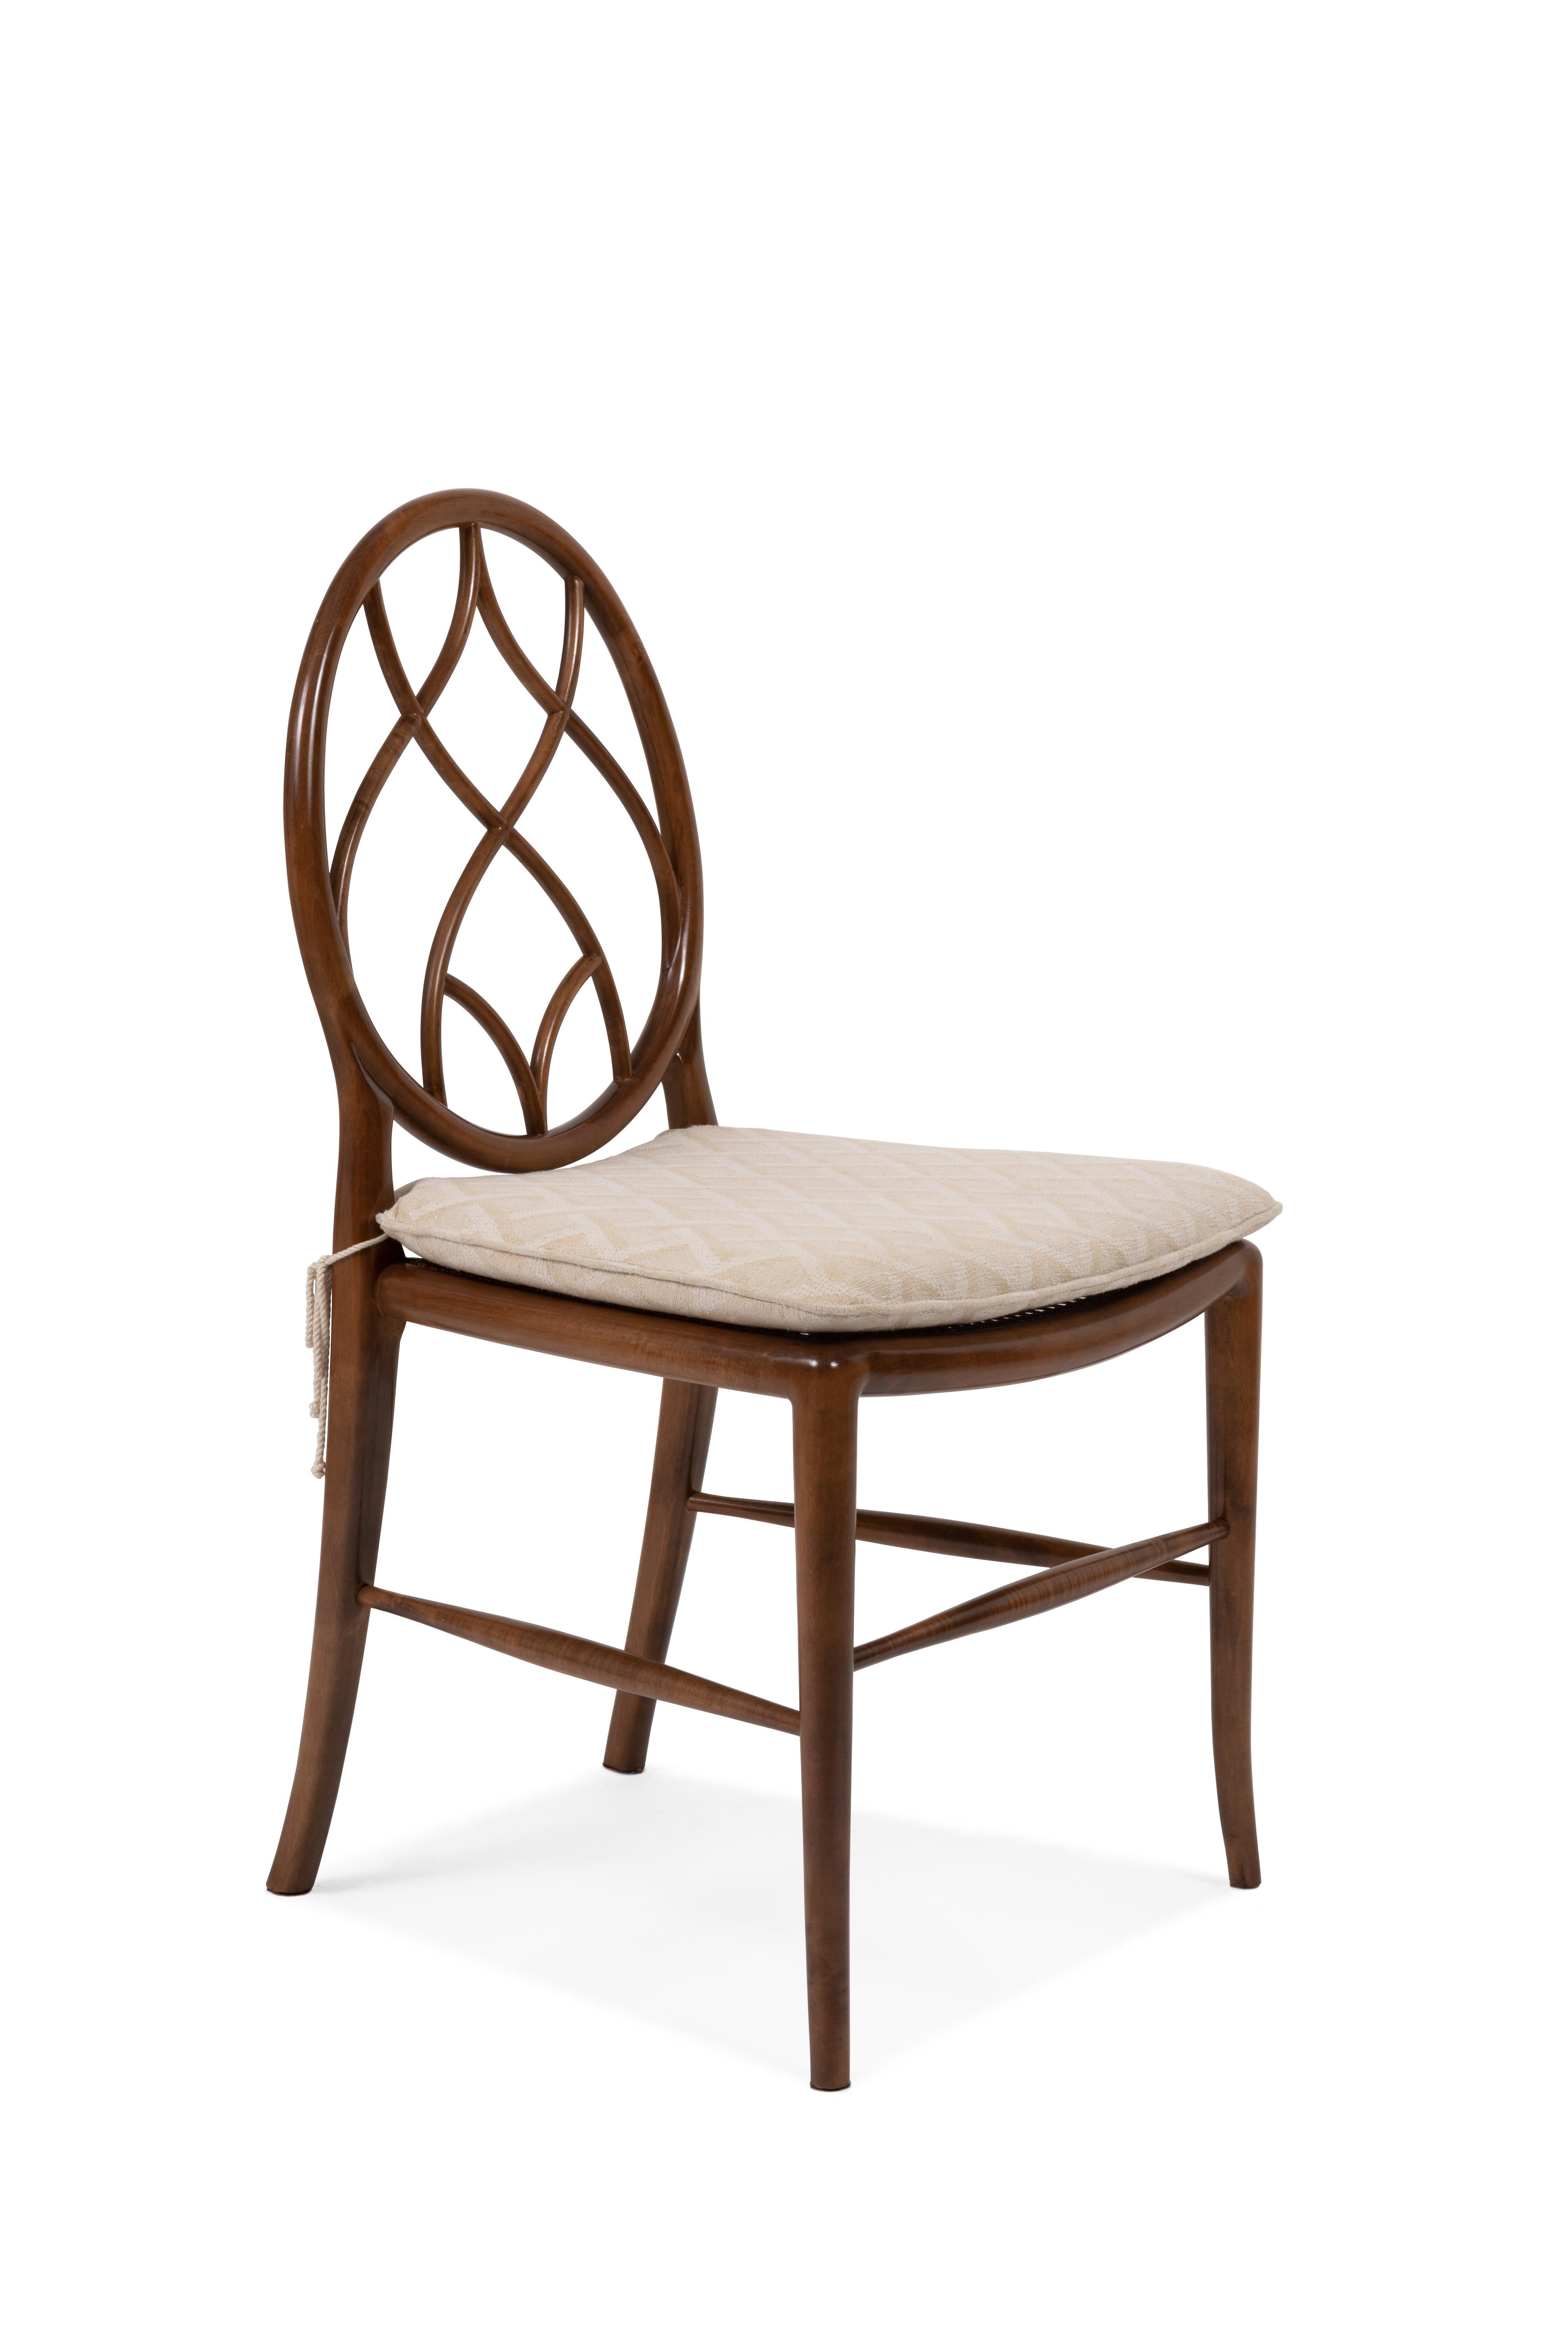 Decorative dining chair. This chair was designed by Belloni in 1990 and included in its 